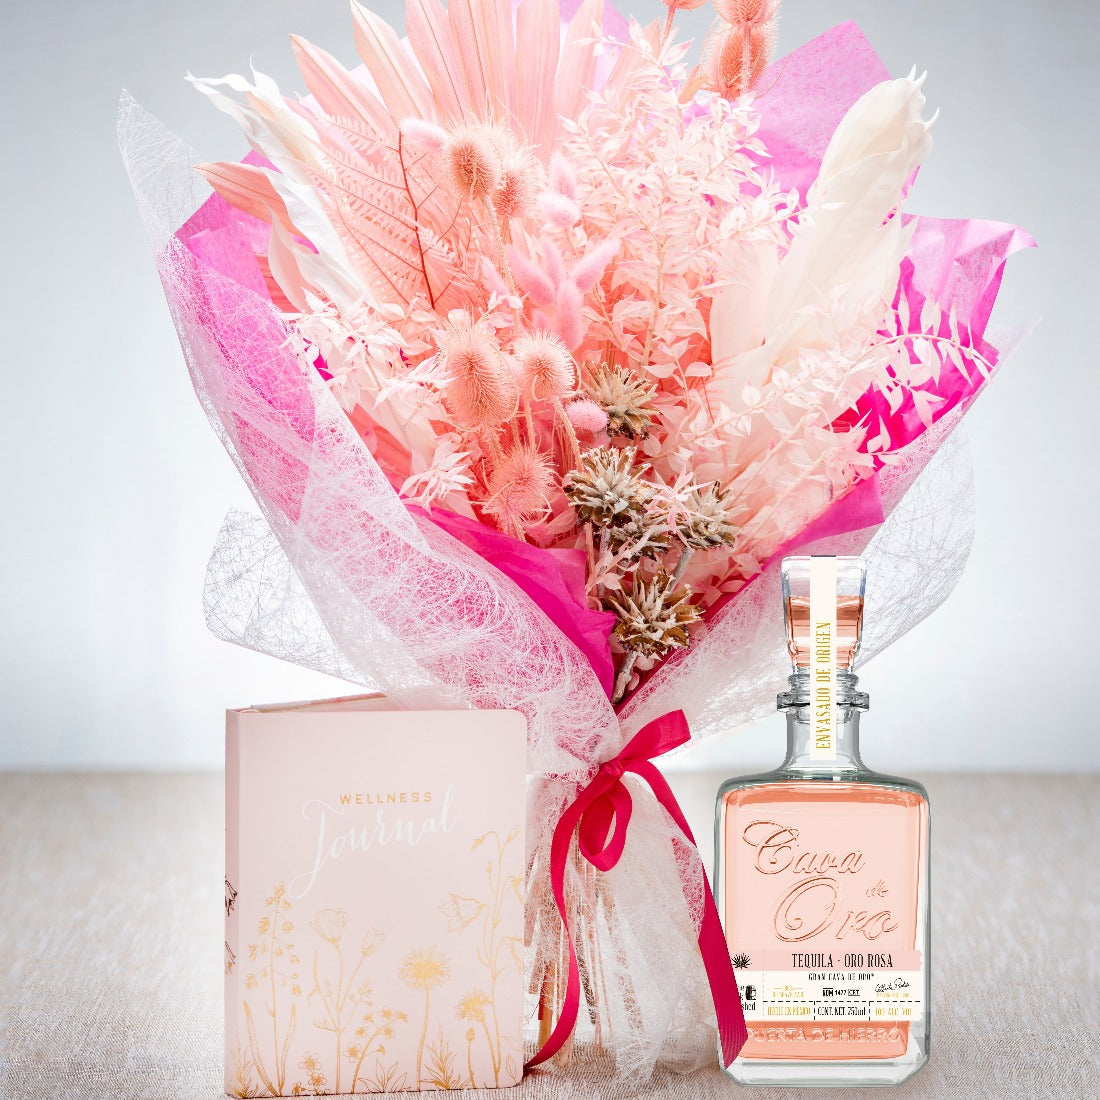 Blushing Rose (includes Cava de Oro Rose Gold Tequila)